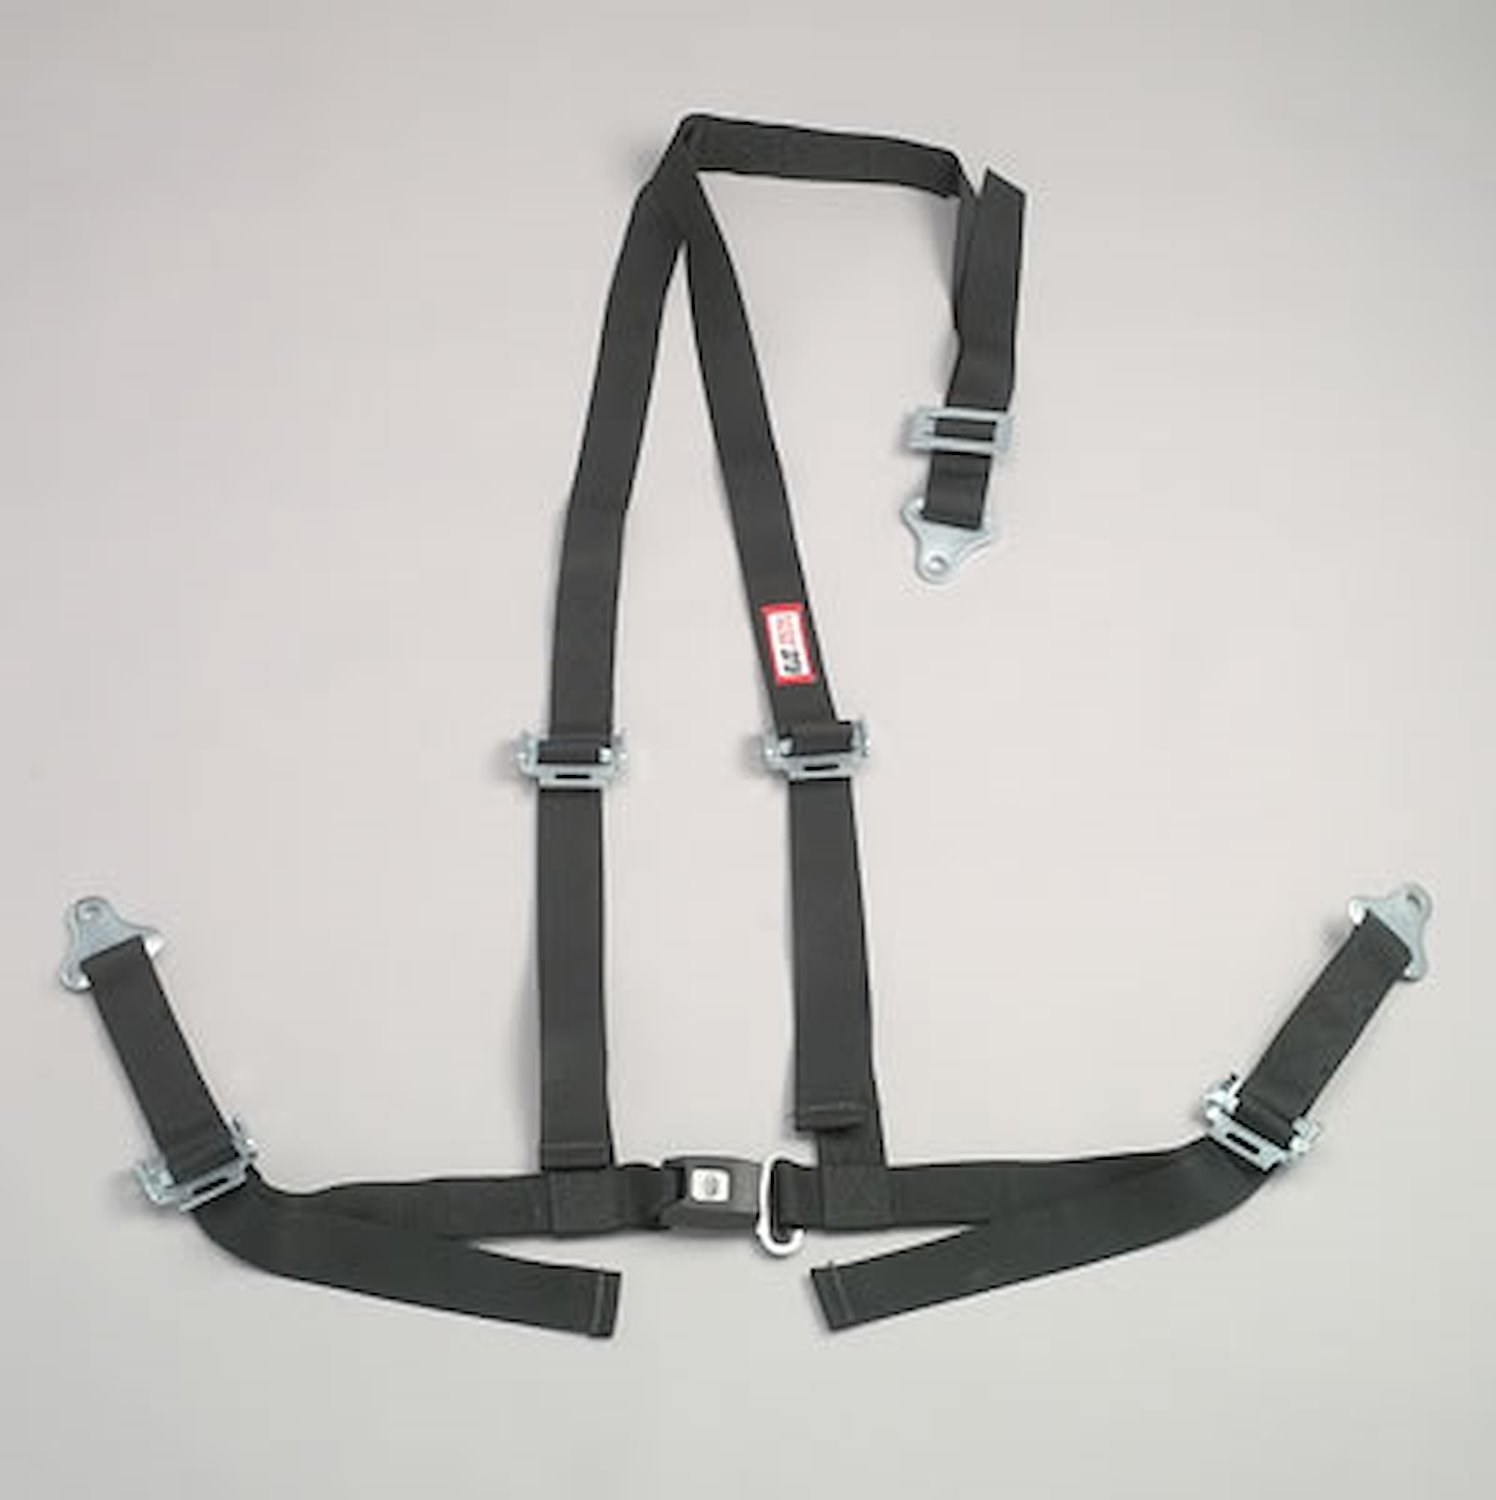 NON-SFI B&T HARNESS 2 PULL UP Lap Belt 2 S. H. V ROLL BAR Mount ALL WRAP ENDS w/STERNUM STRAP OD GREEN